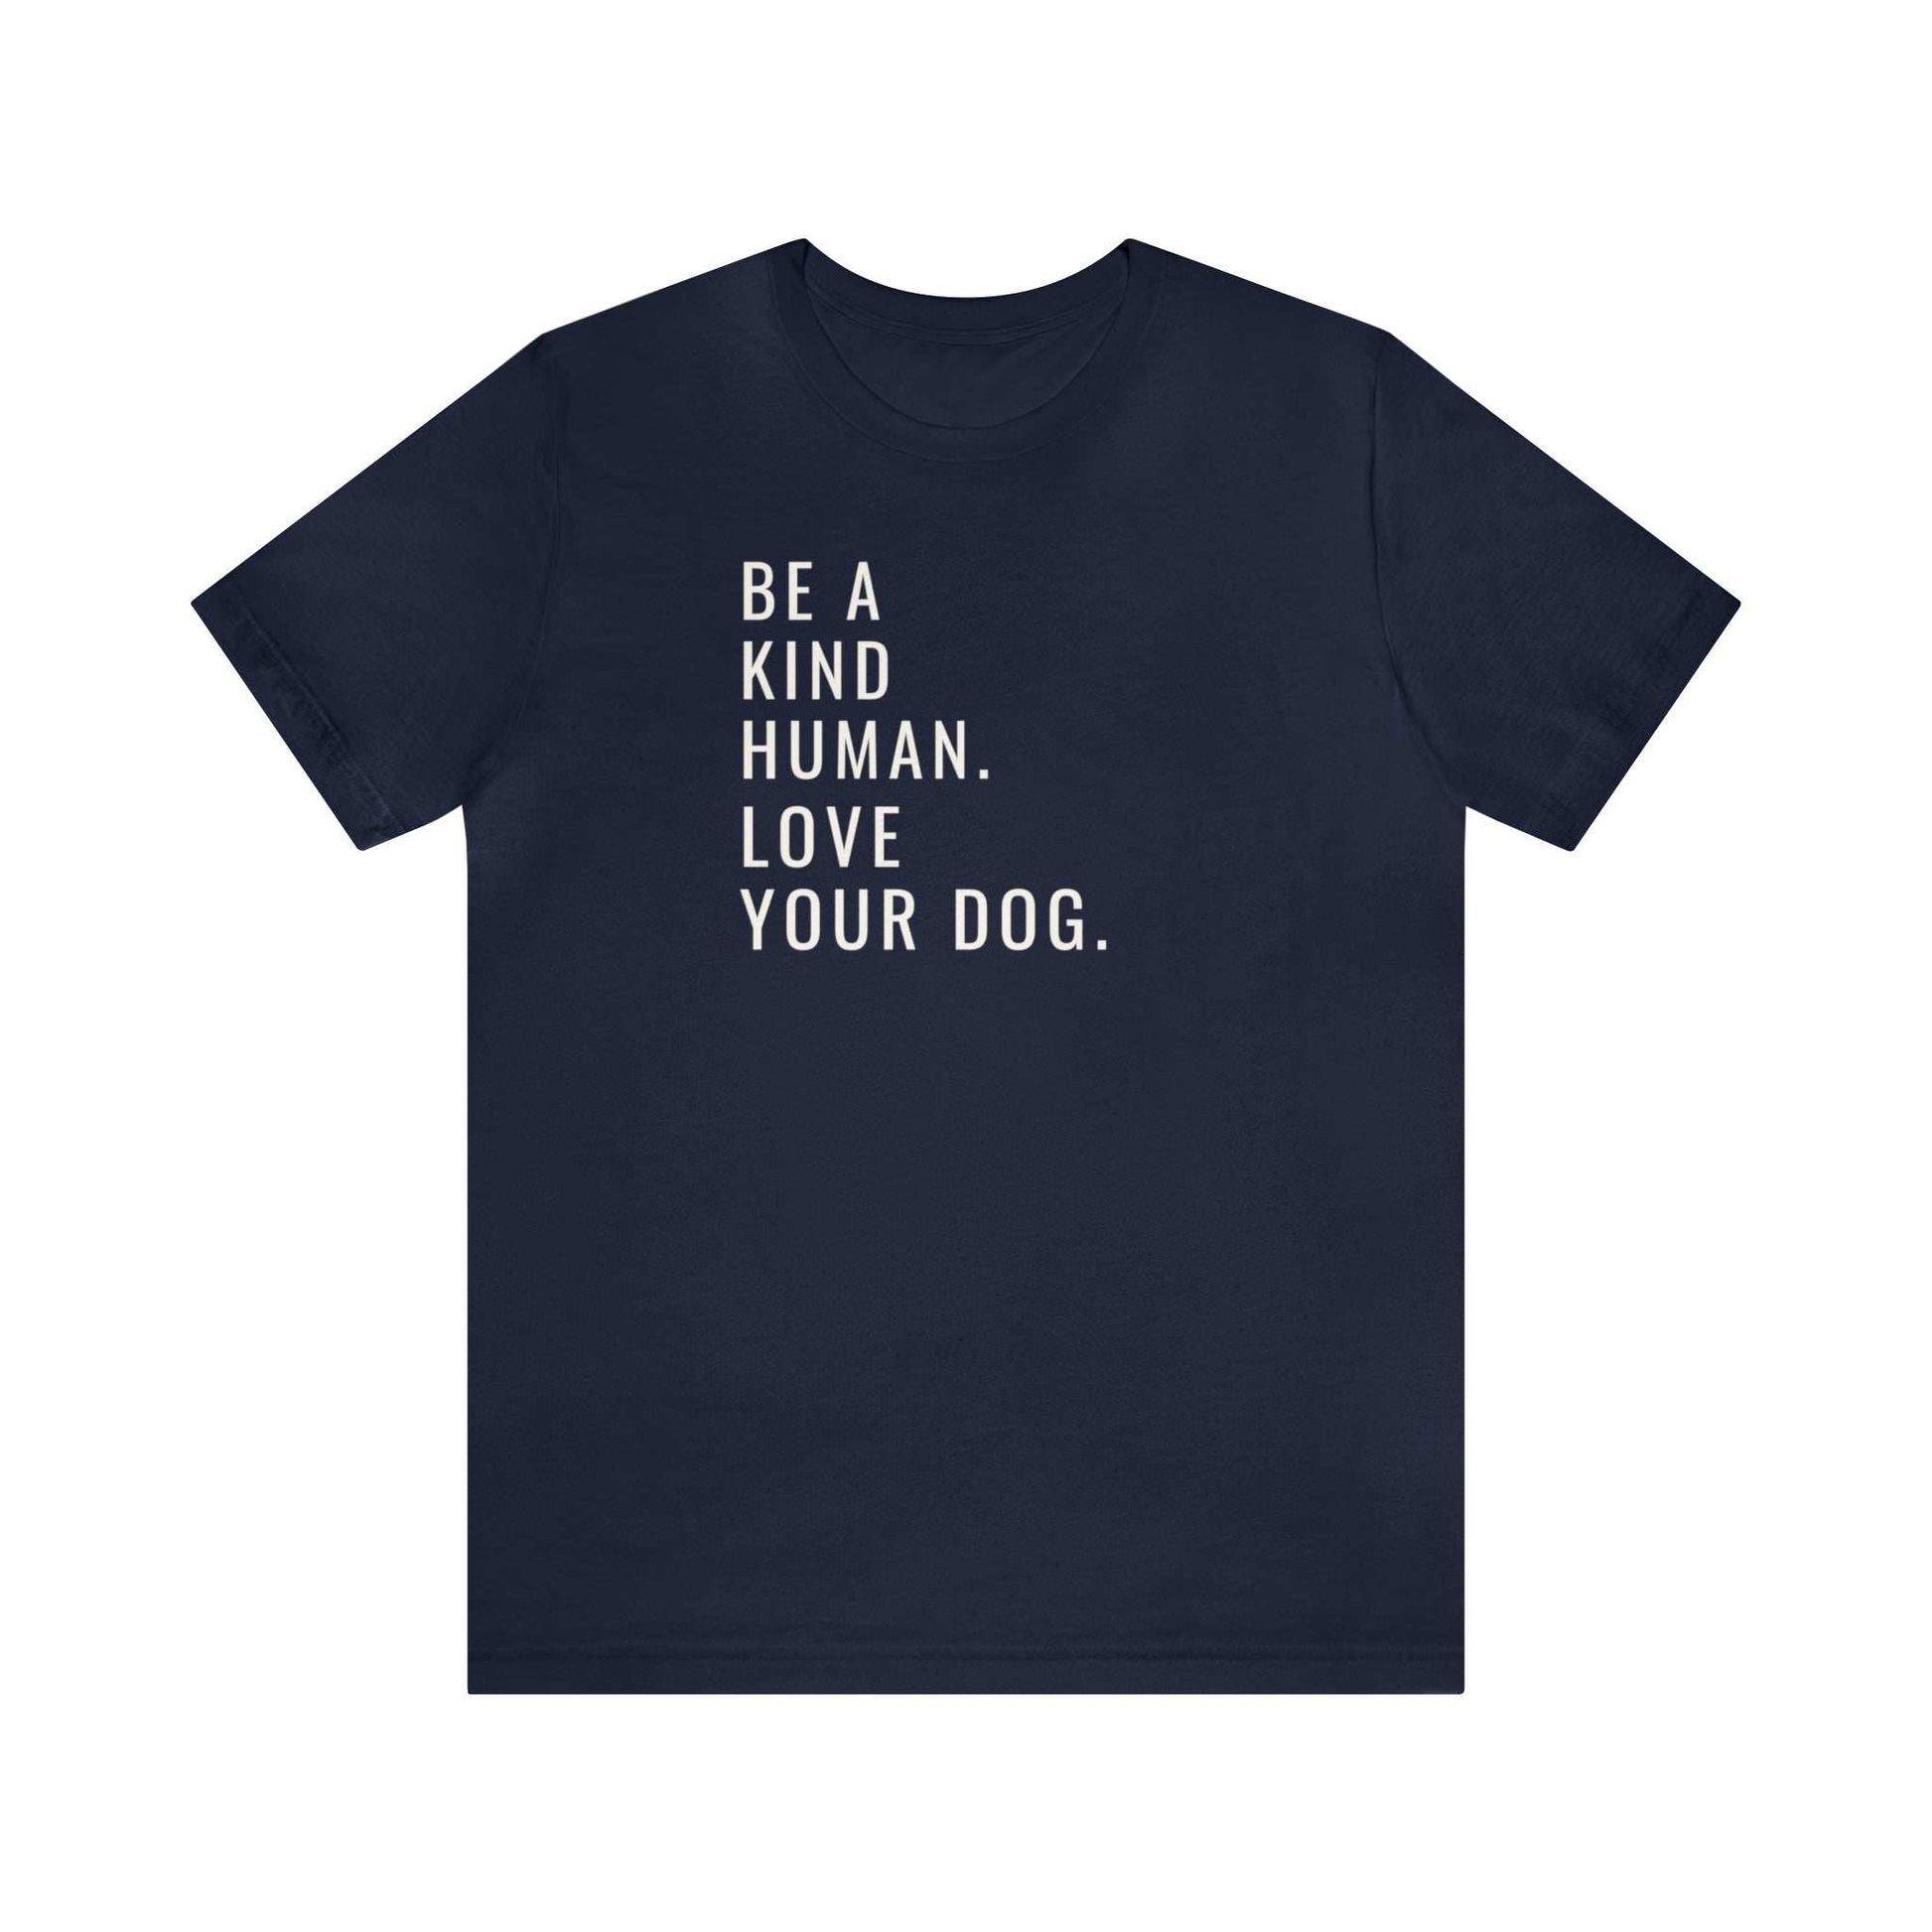 Fabulous Tee Shirts' ' Be A Kind Human Love Your Dog ' blue t-shirt displayed to emphasize its superior quality.